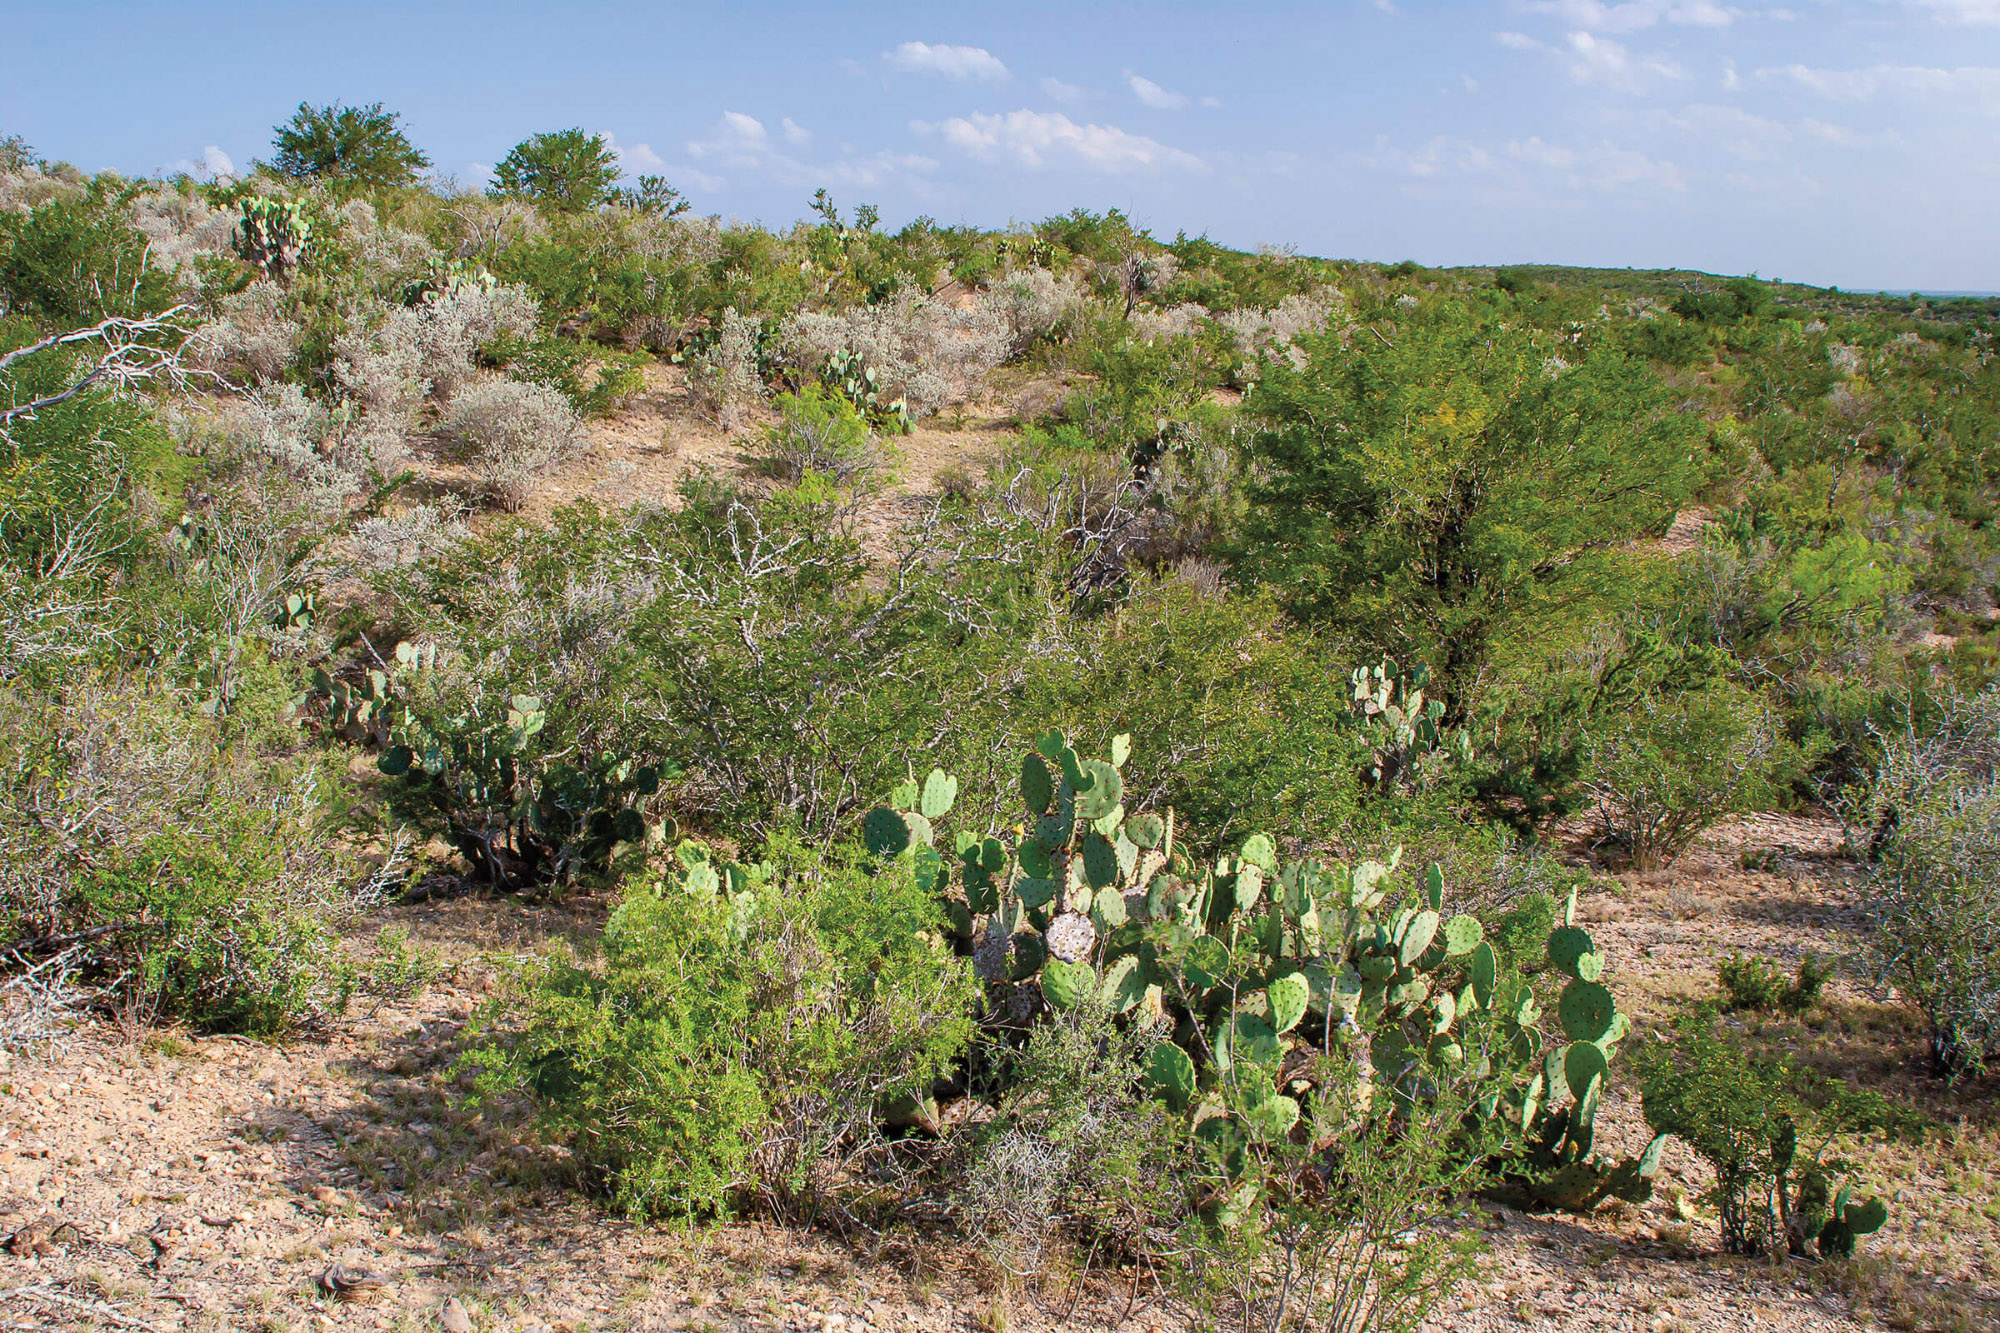 A desert lanscape with prickly pear cactus